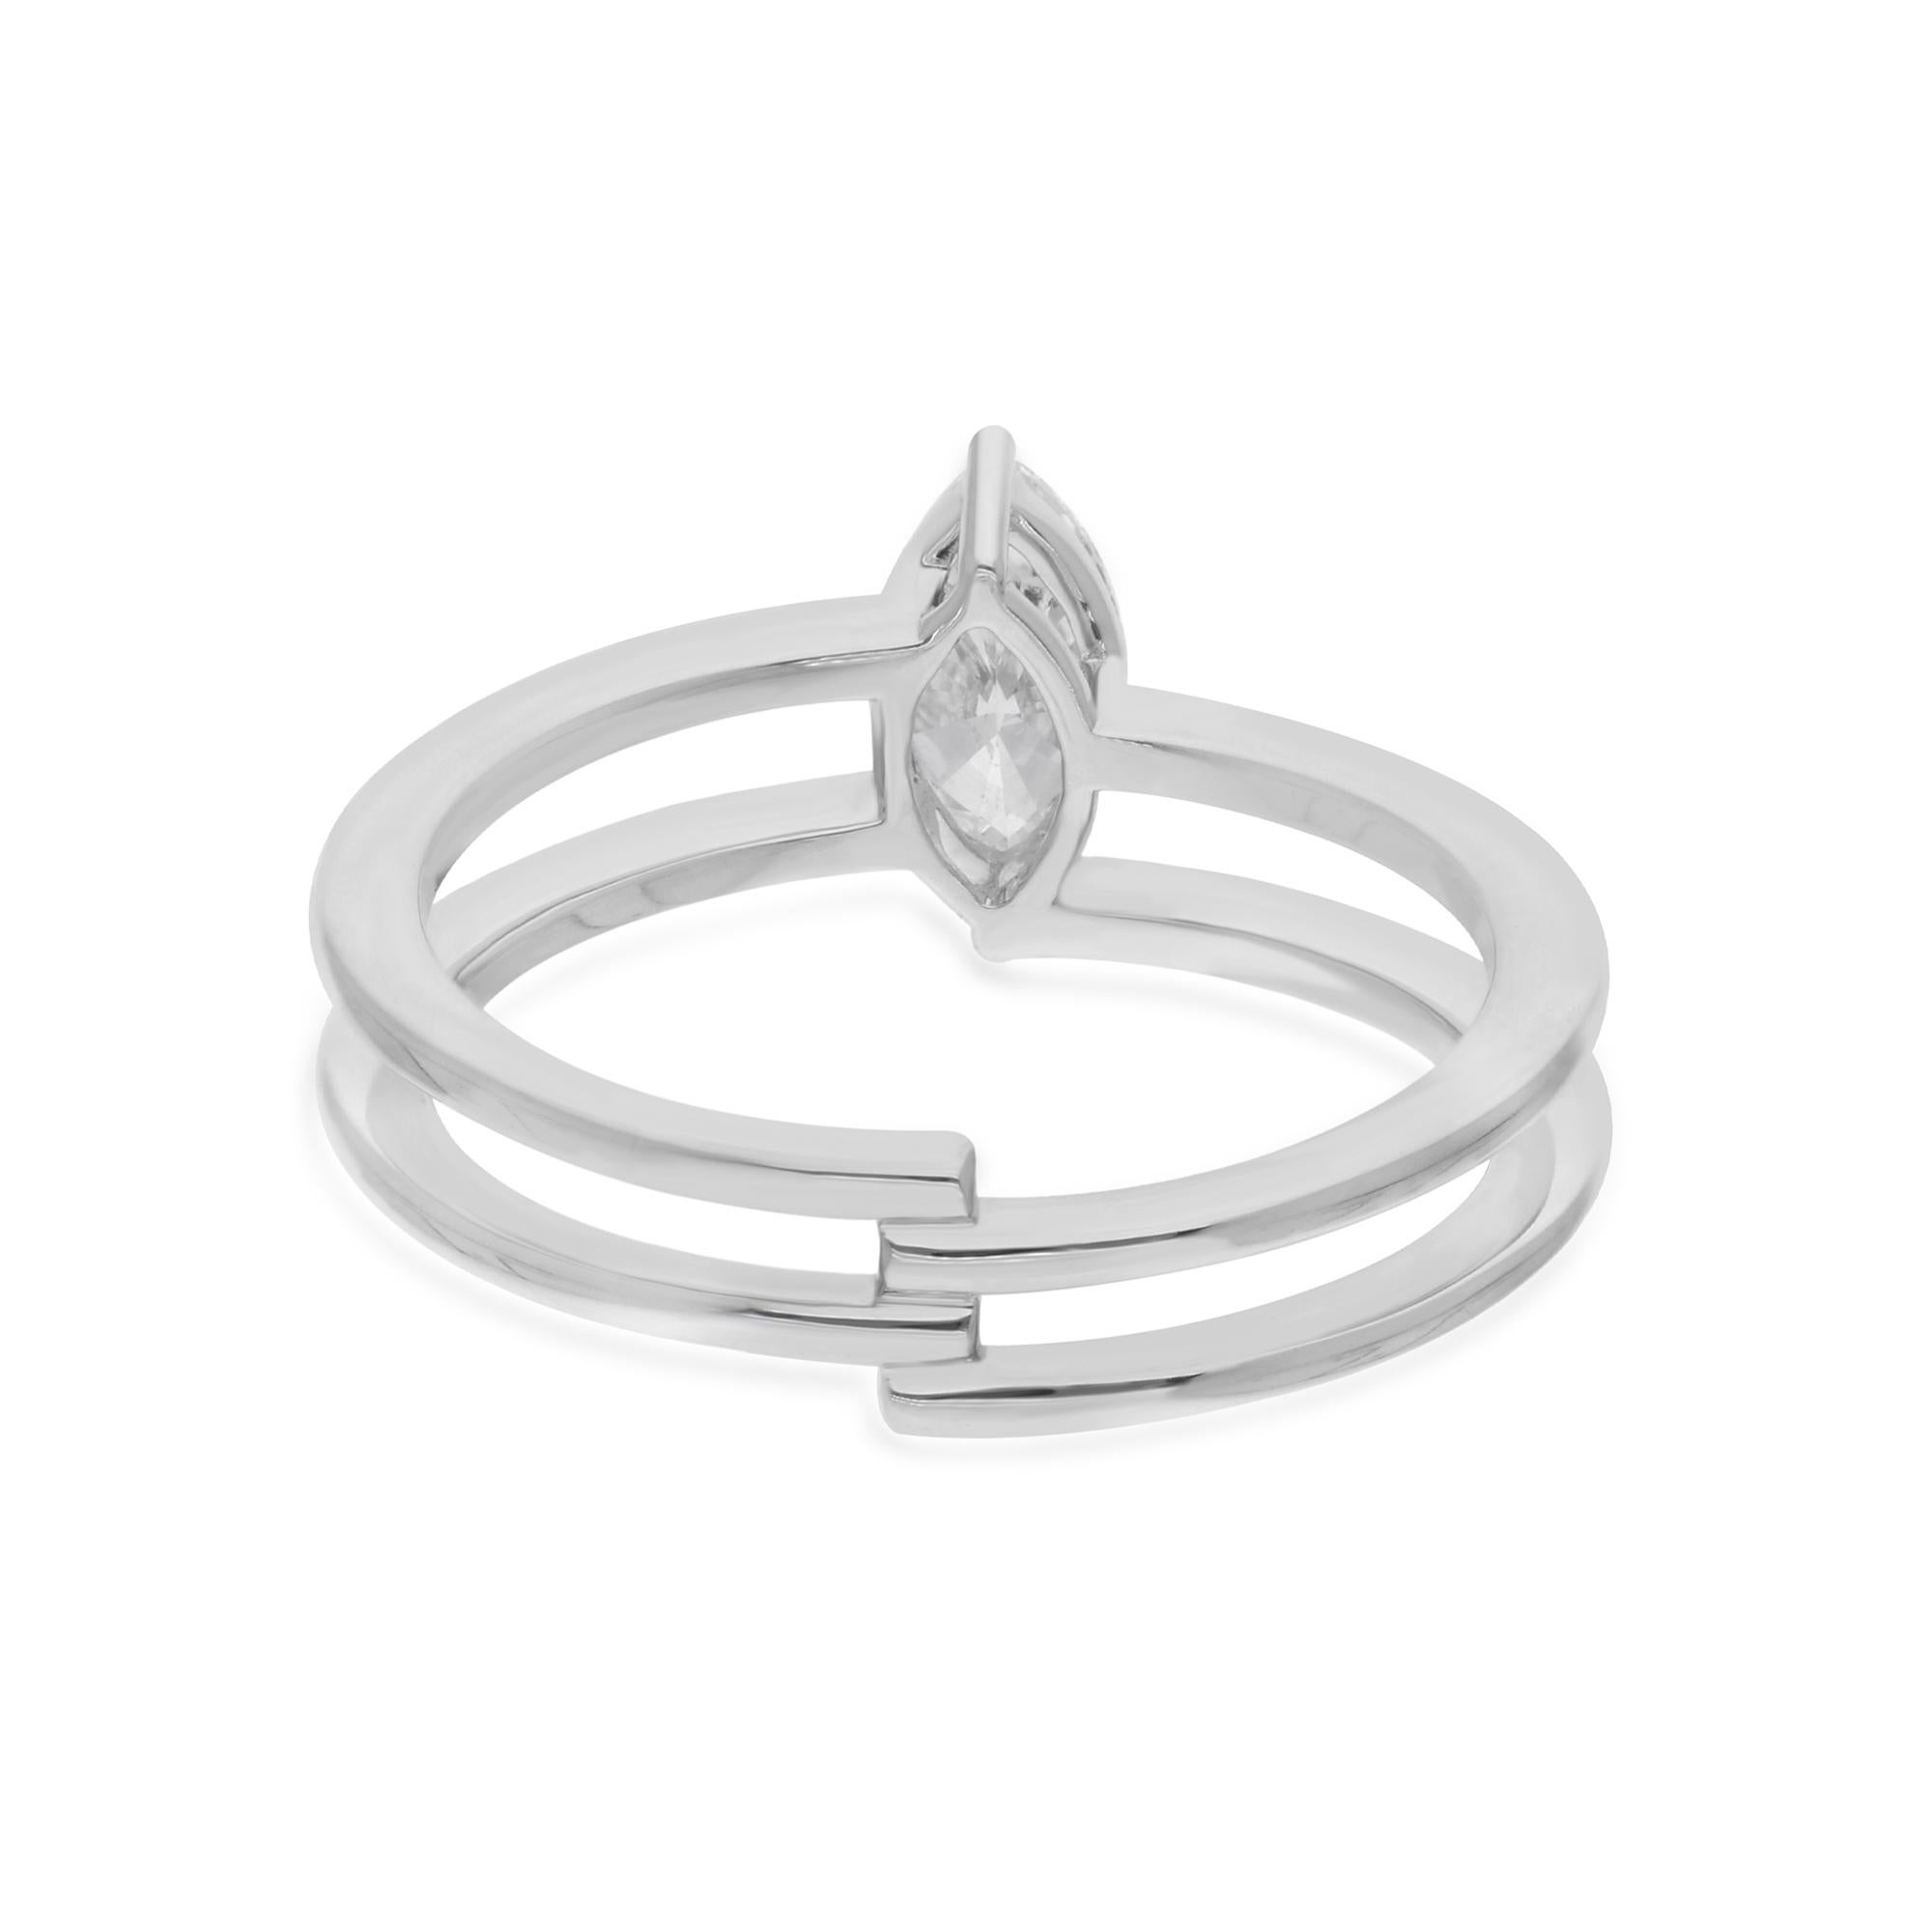 Embrace the timeless elegance and sophistication of this Natural 0.61 Carat Solitaire Marquise Diamond Ring, meticulously crafted in 18 karat white gold. At the heart of this exquisite ring lies a stunning marquise-cut diamond, boasting a remarkable